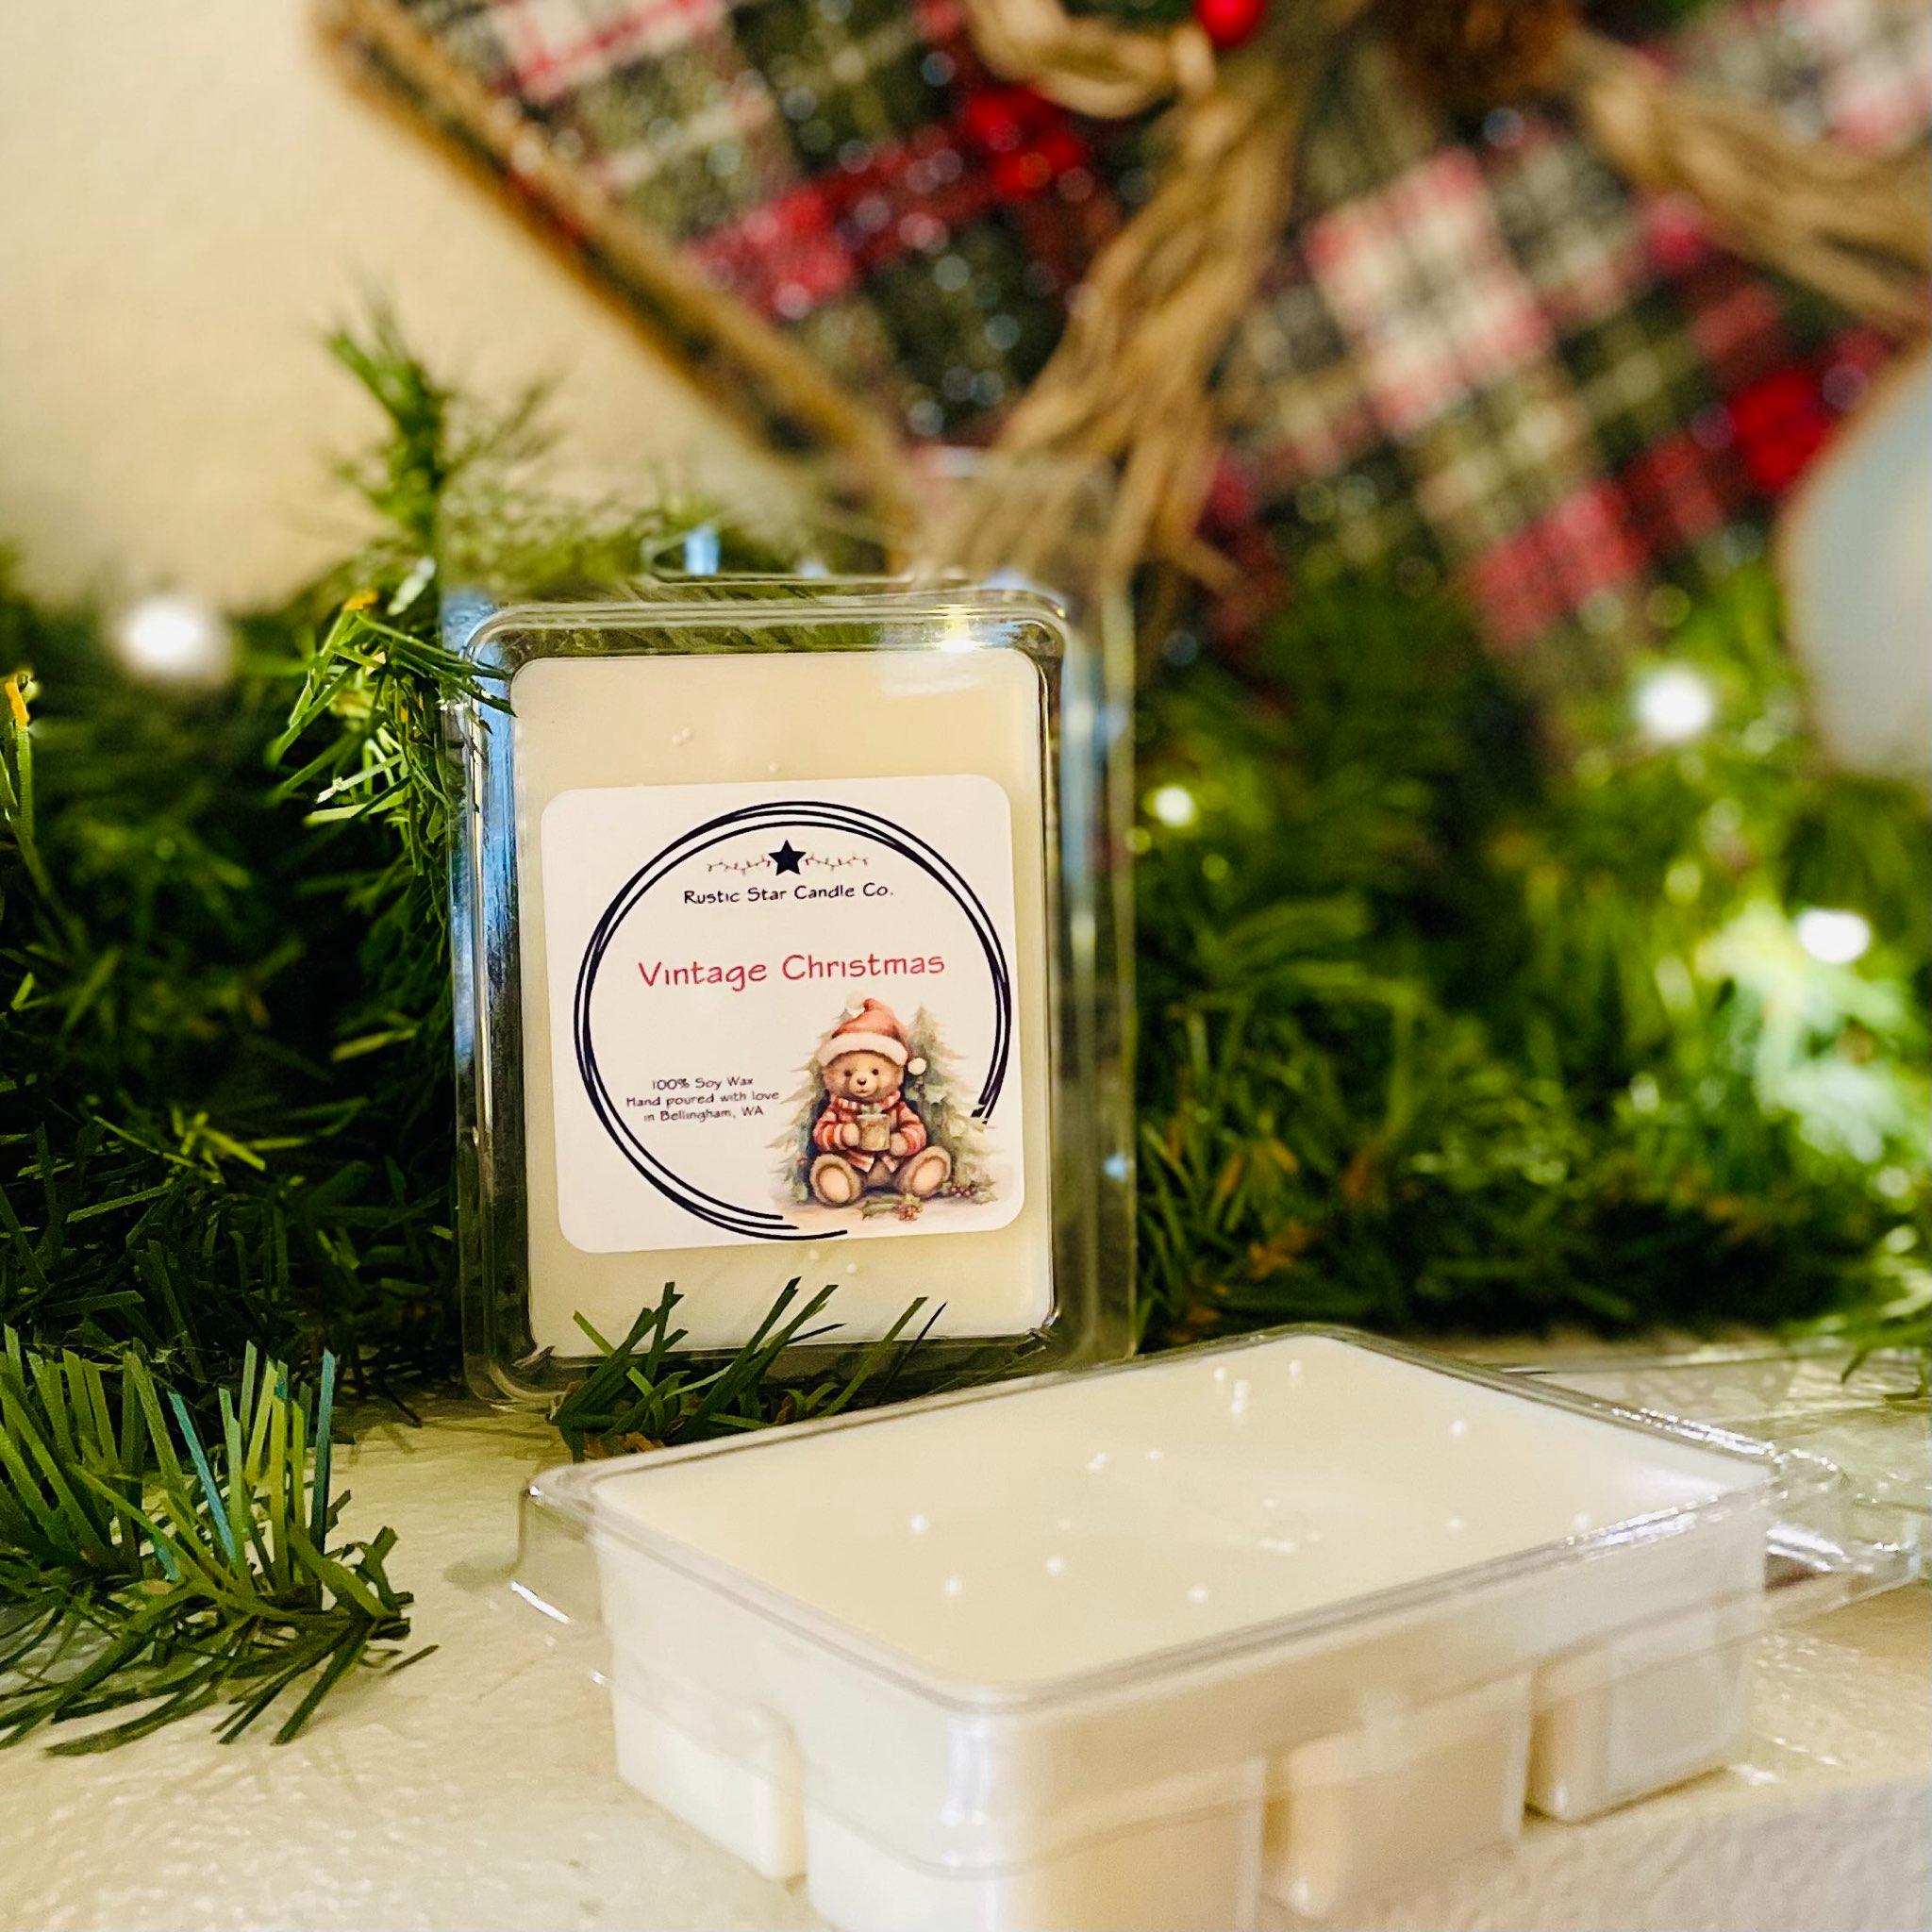 Vintage Christmas Wax Melts by Candlecopia®, 2 Pack